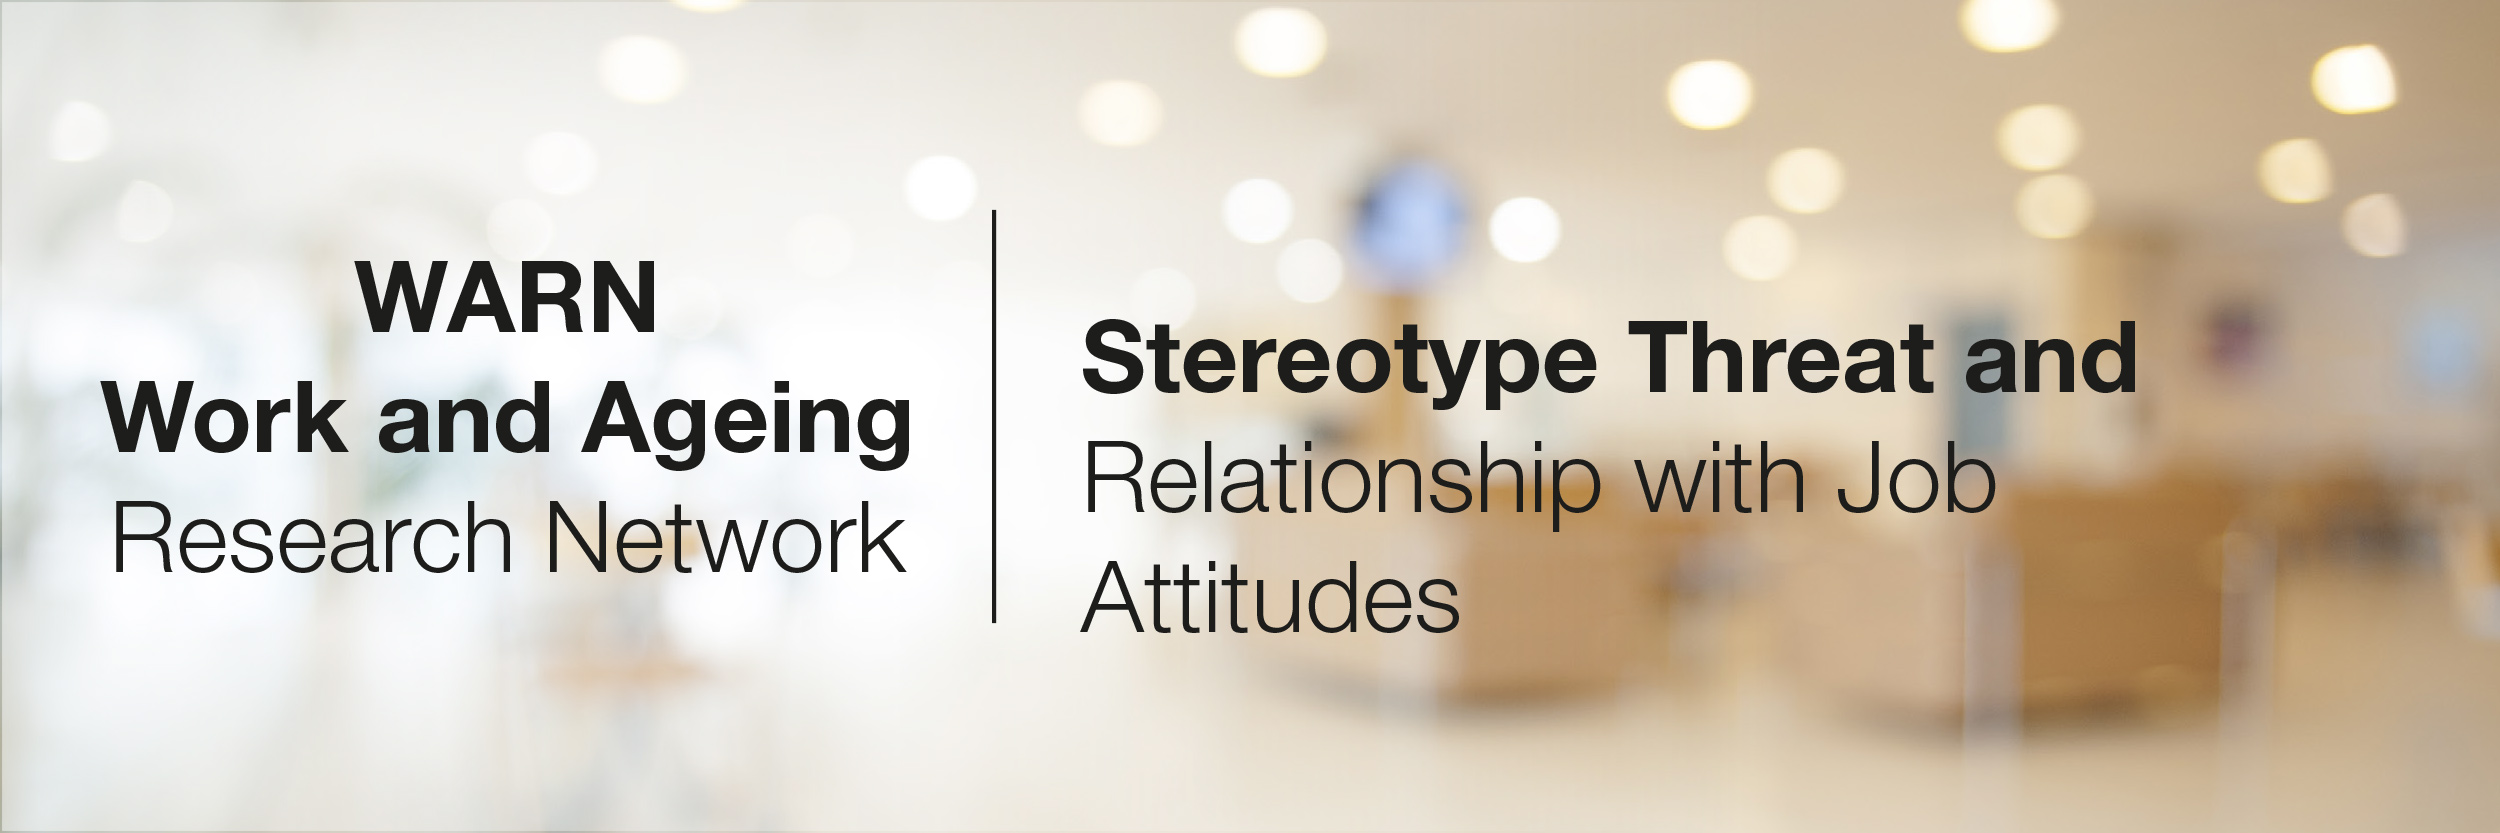 Stereotype threat and relationship with jub attitudes